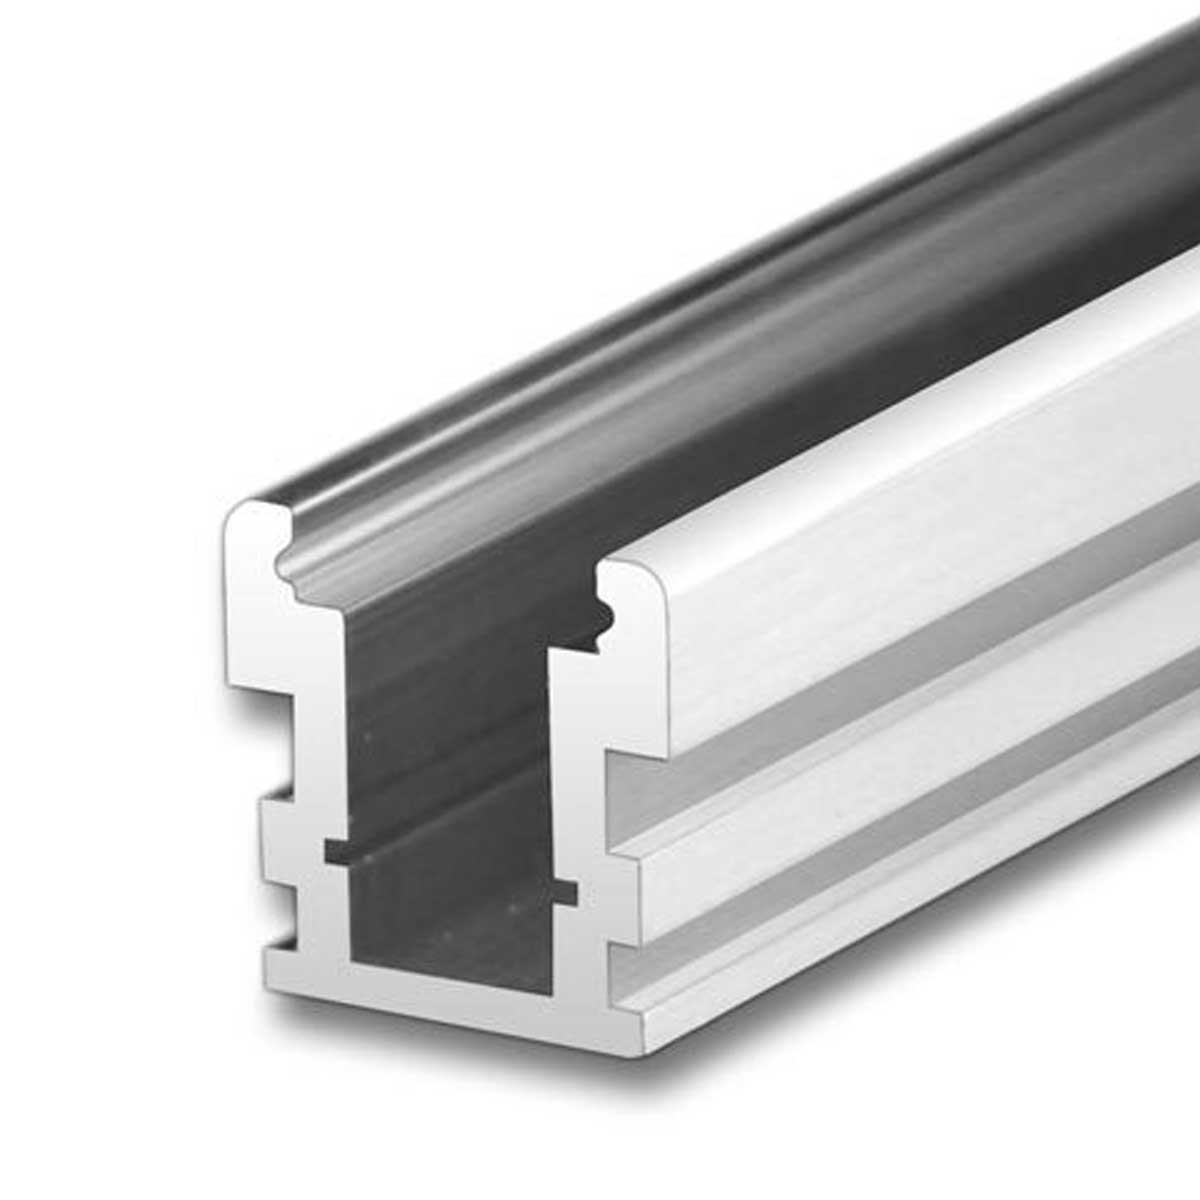 1000 Aluminium Slotted Channel Manufacturers, Suppliers in Ludhiana